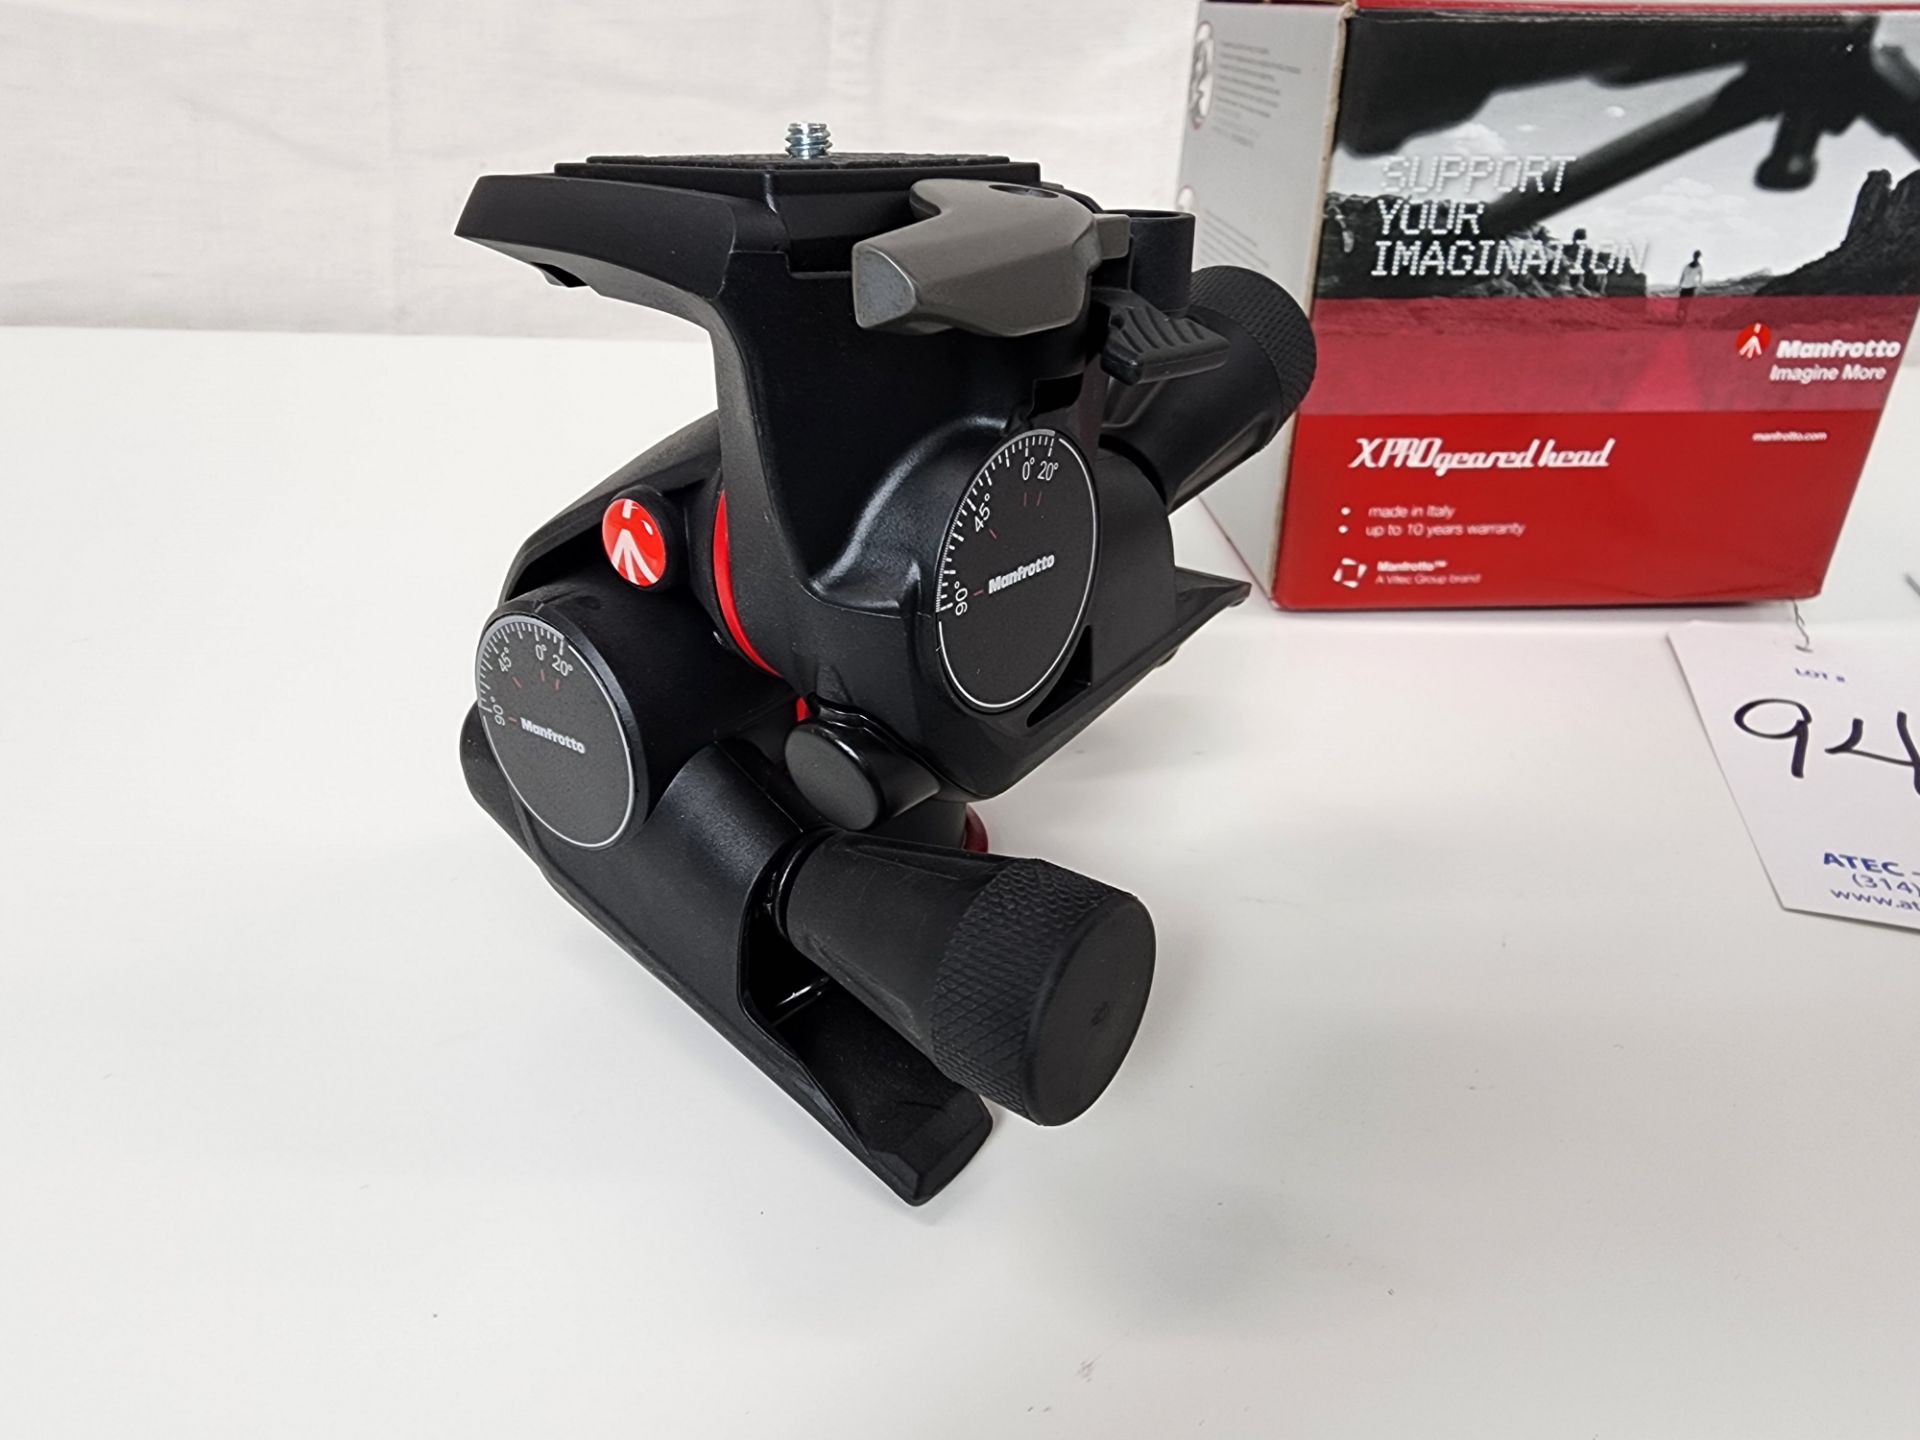 Manfrotto Model MHXPRO-3WG Geared 3-Way Pan & Tilt Tripod Head w/Quick Release & Original Box - Image 3 of 5